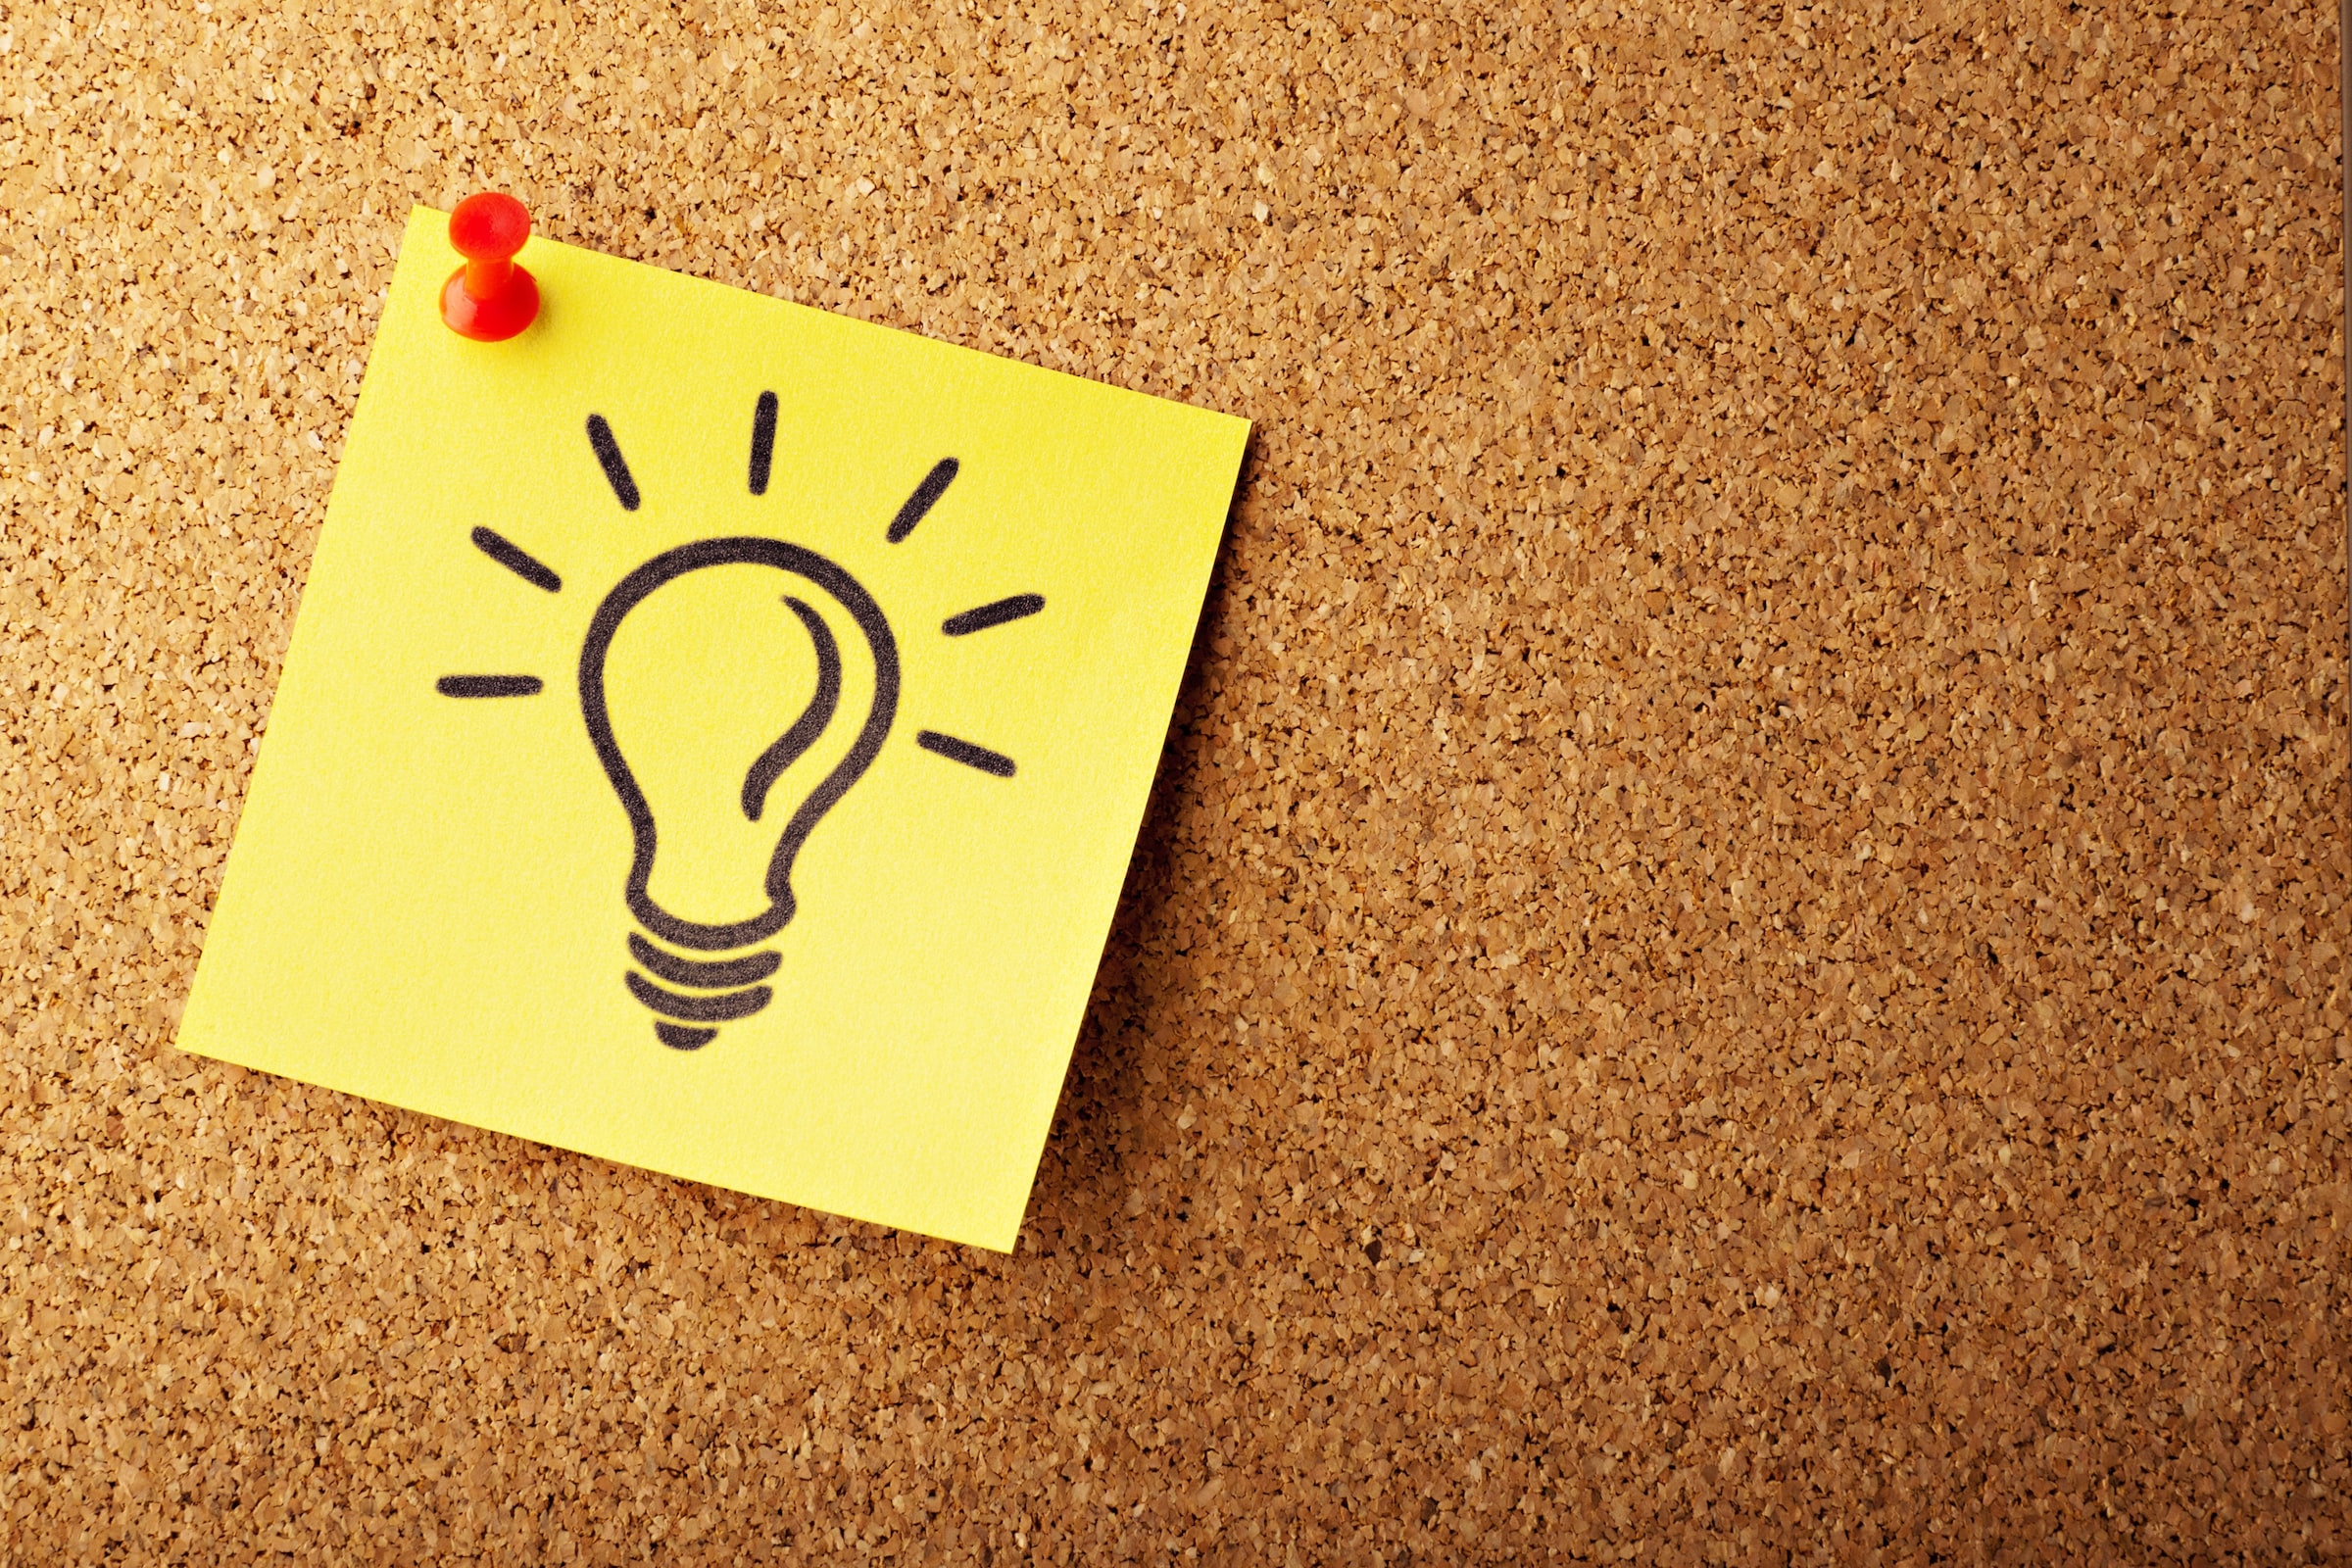 a bulb image on a yellow post-it is pinned on a board stock image